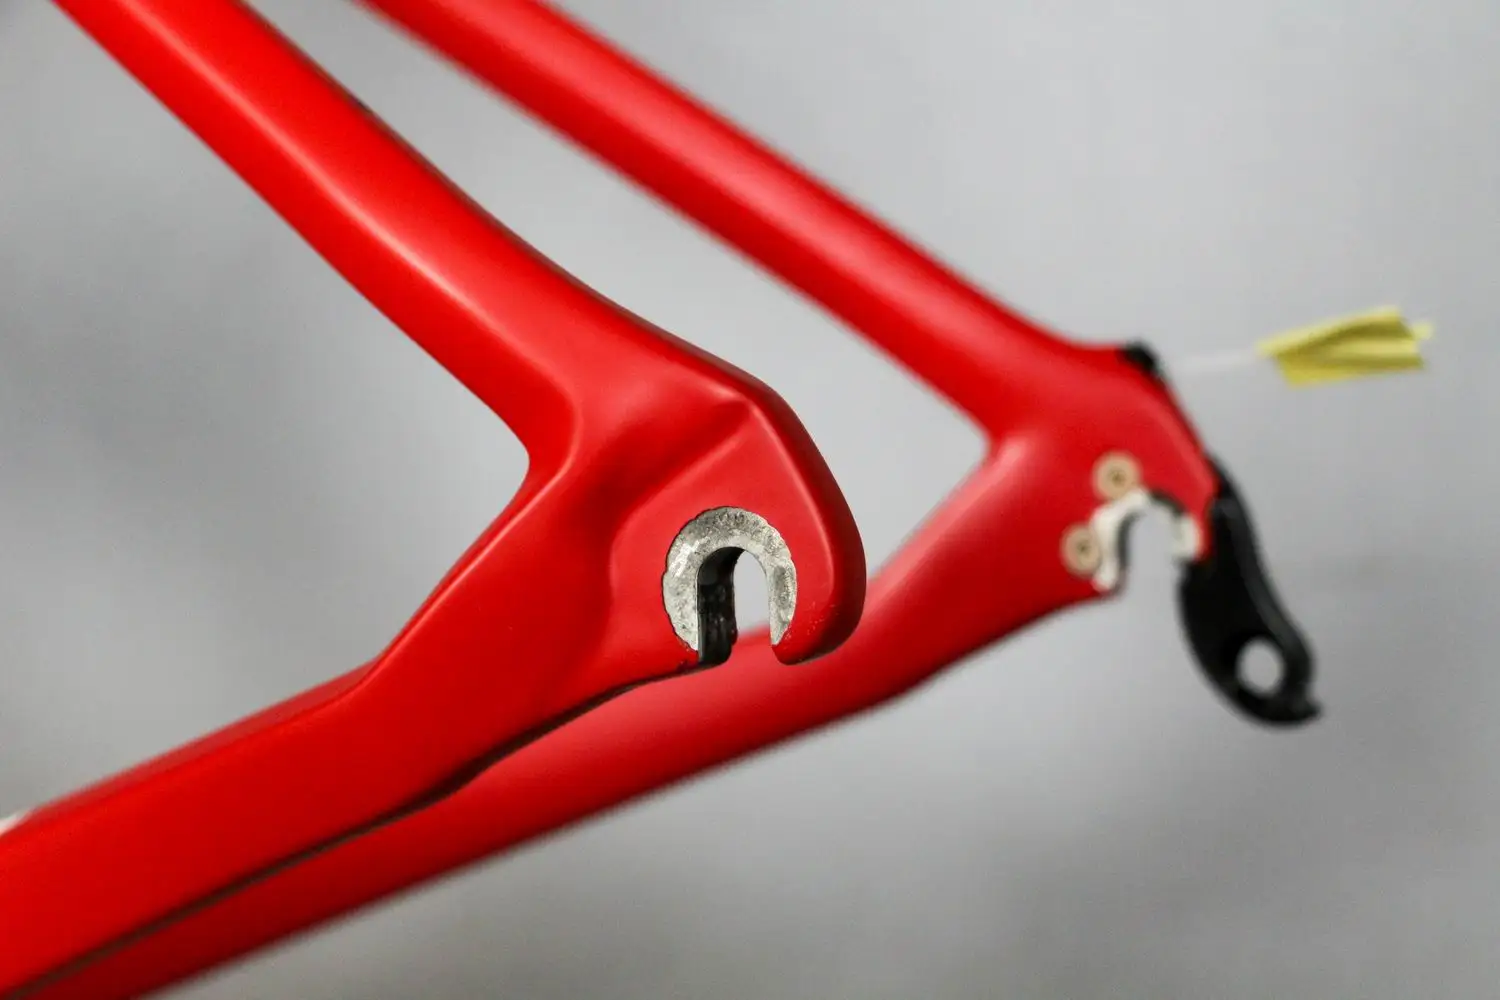 Discount Di2 compatible with aviation carbon road bike frame and carbon fiber road bike frame, custom frame tt-x8 4